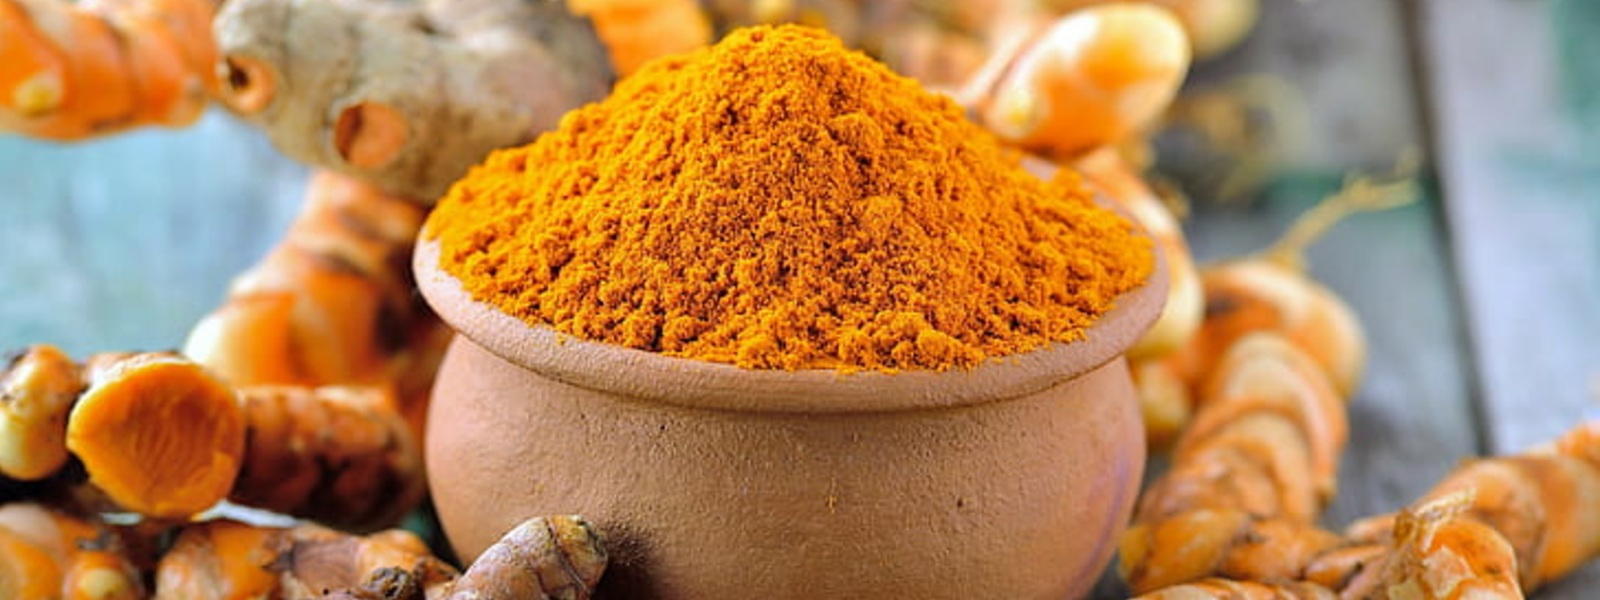 Sri Lanka expected to be self-sufficient in Turmeric by the end of 2021